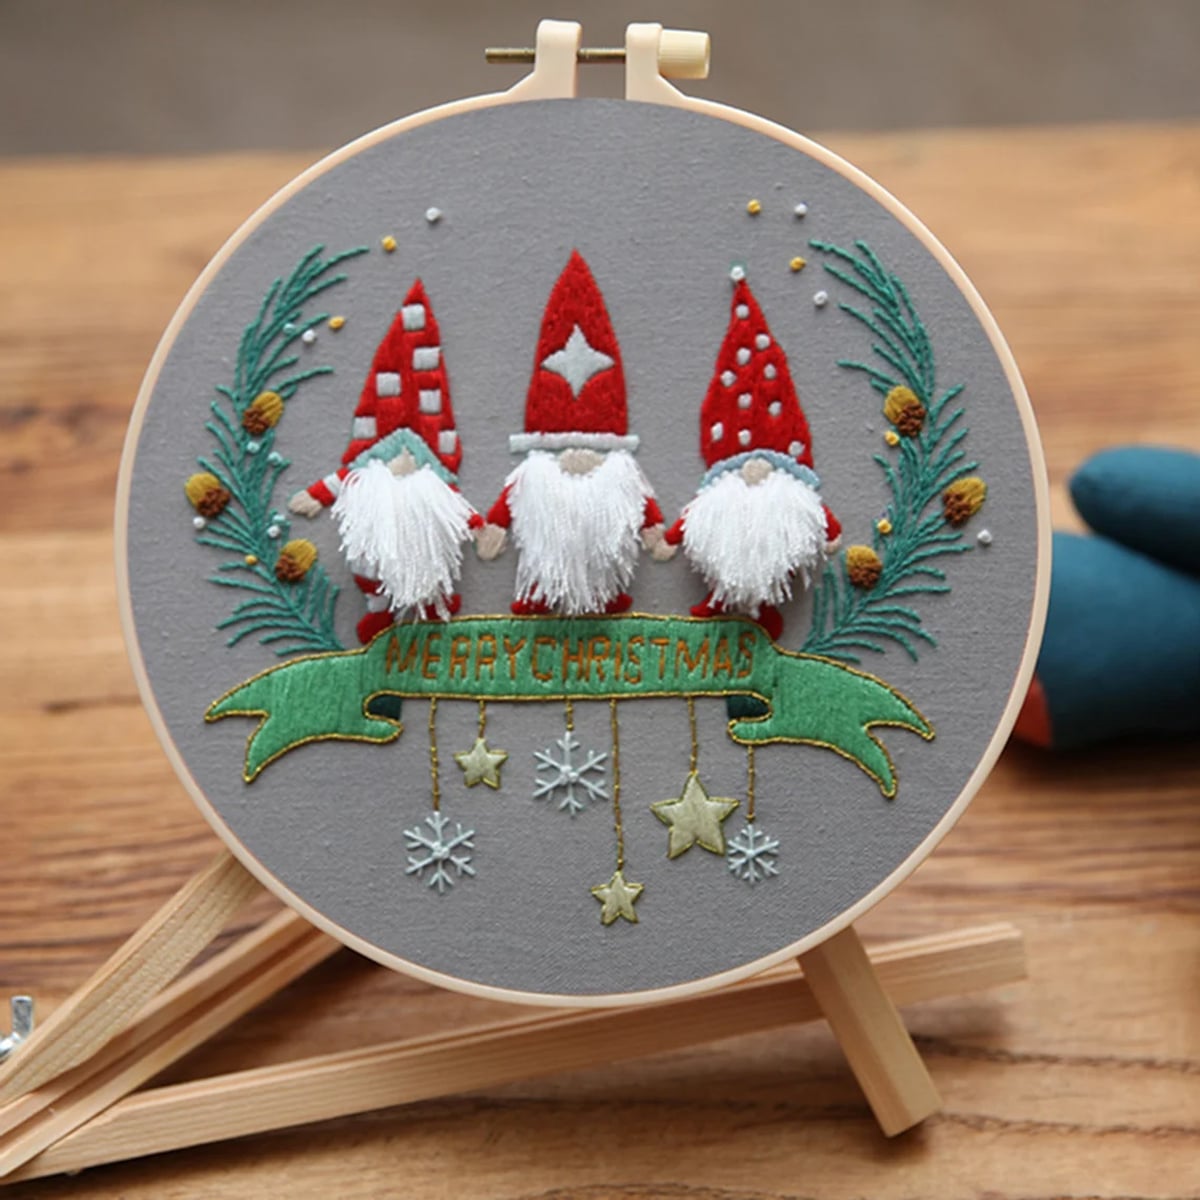 gnome-themed embroidery kits